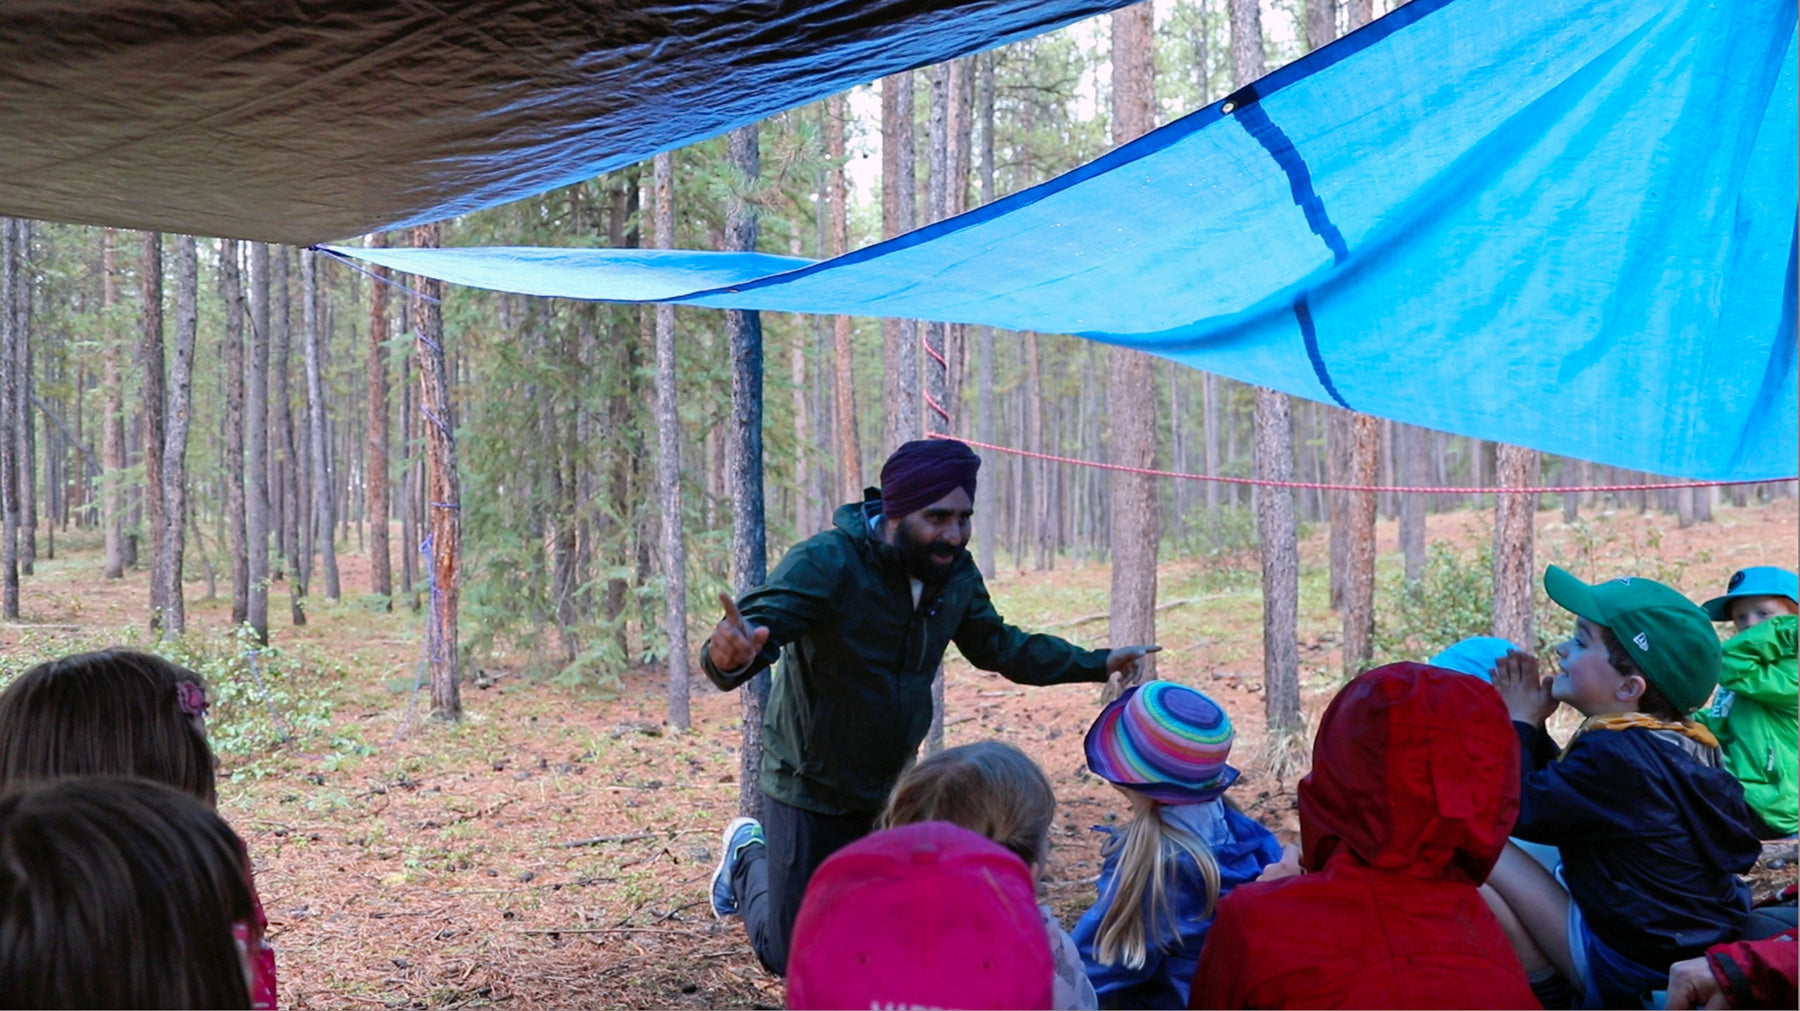 Gurdeep is sharing and learning with young children near a forest in Whitehorse in nature and open outdoor environment. The class was facilitated by Rivers to Ridges, an outdoor learning school in Whitehorse, Yukon.